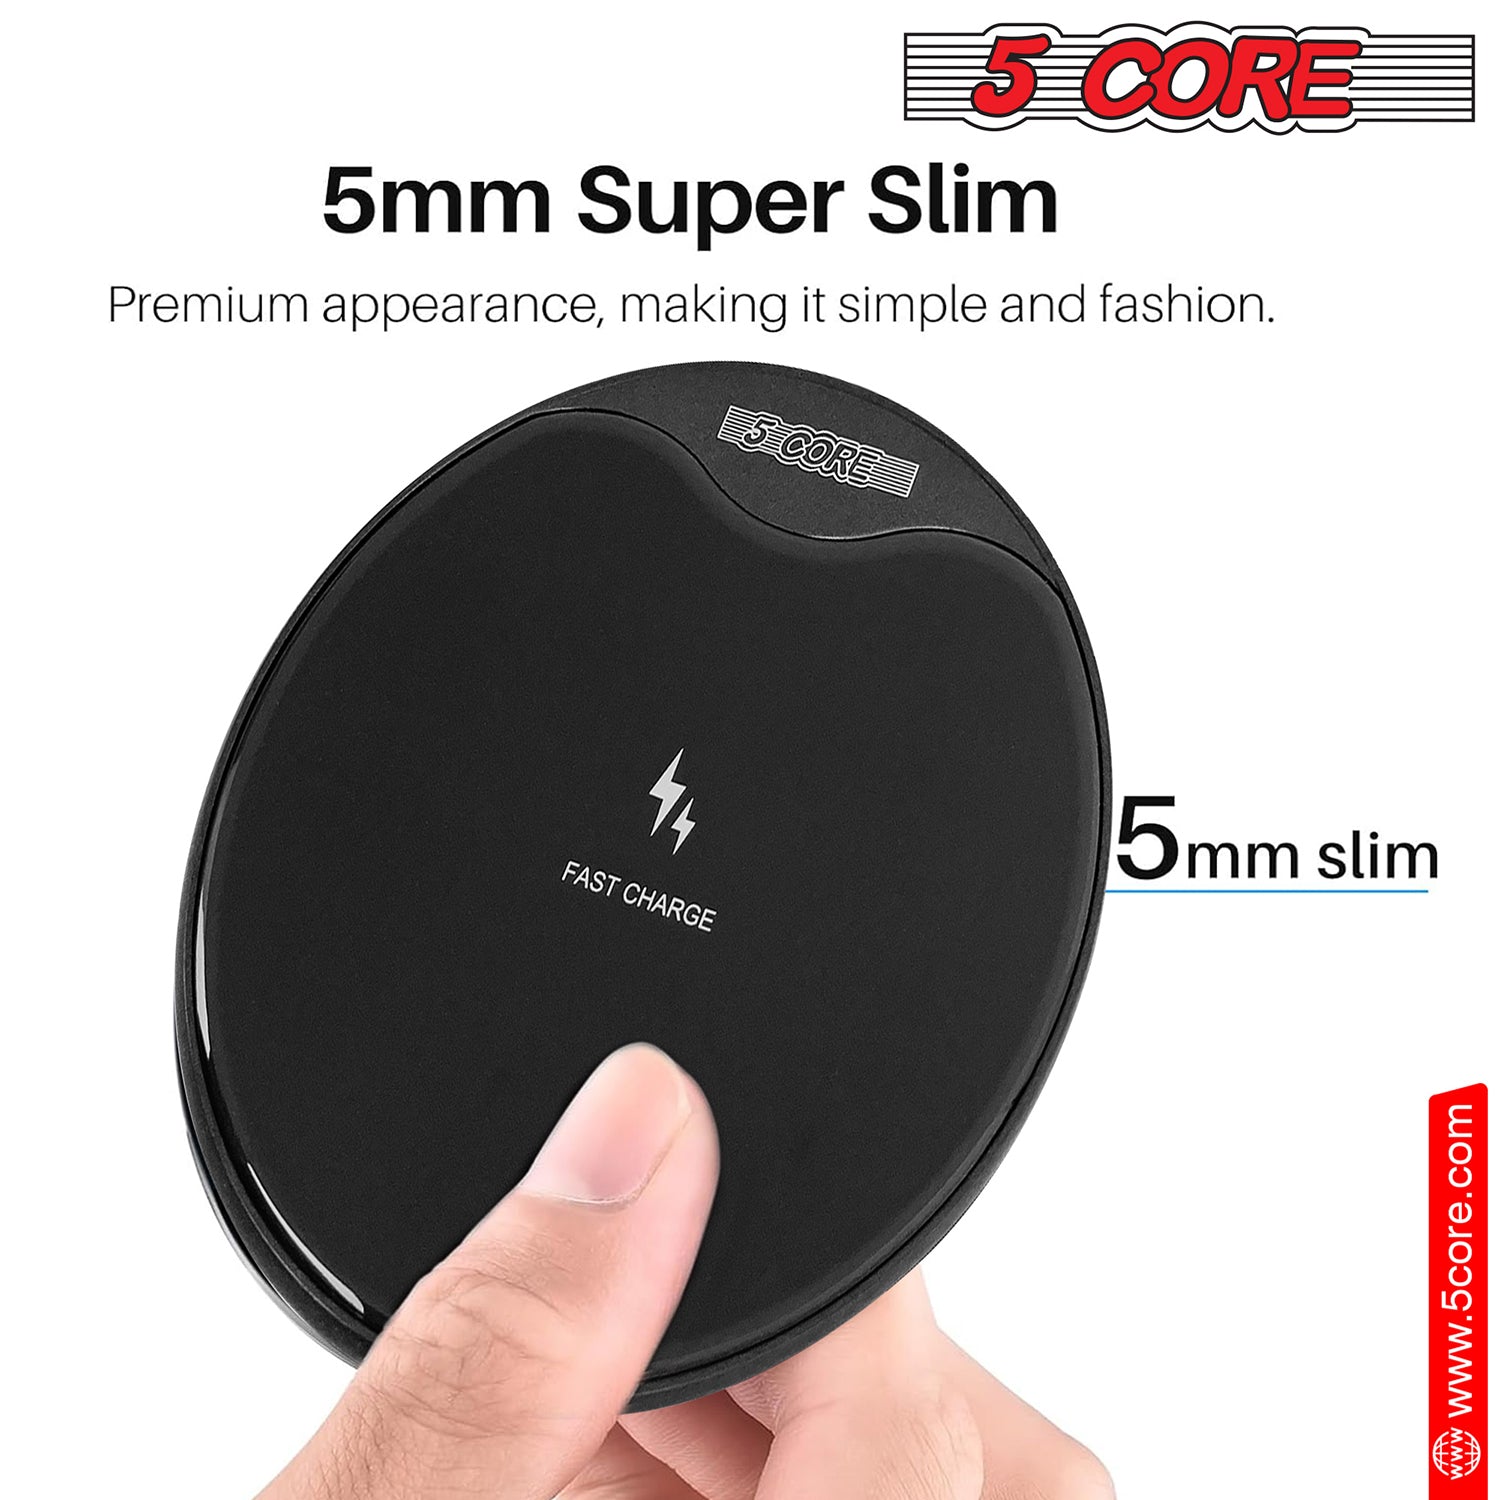 5Core Wireless Charging Pad 15W Qi-Certified Fast Phone Charging Mat Cargador Inalámbrico Para